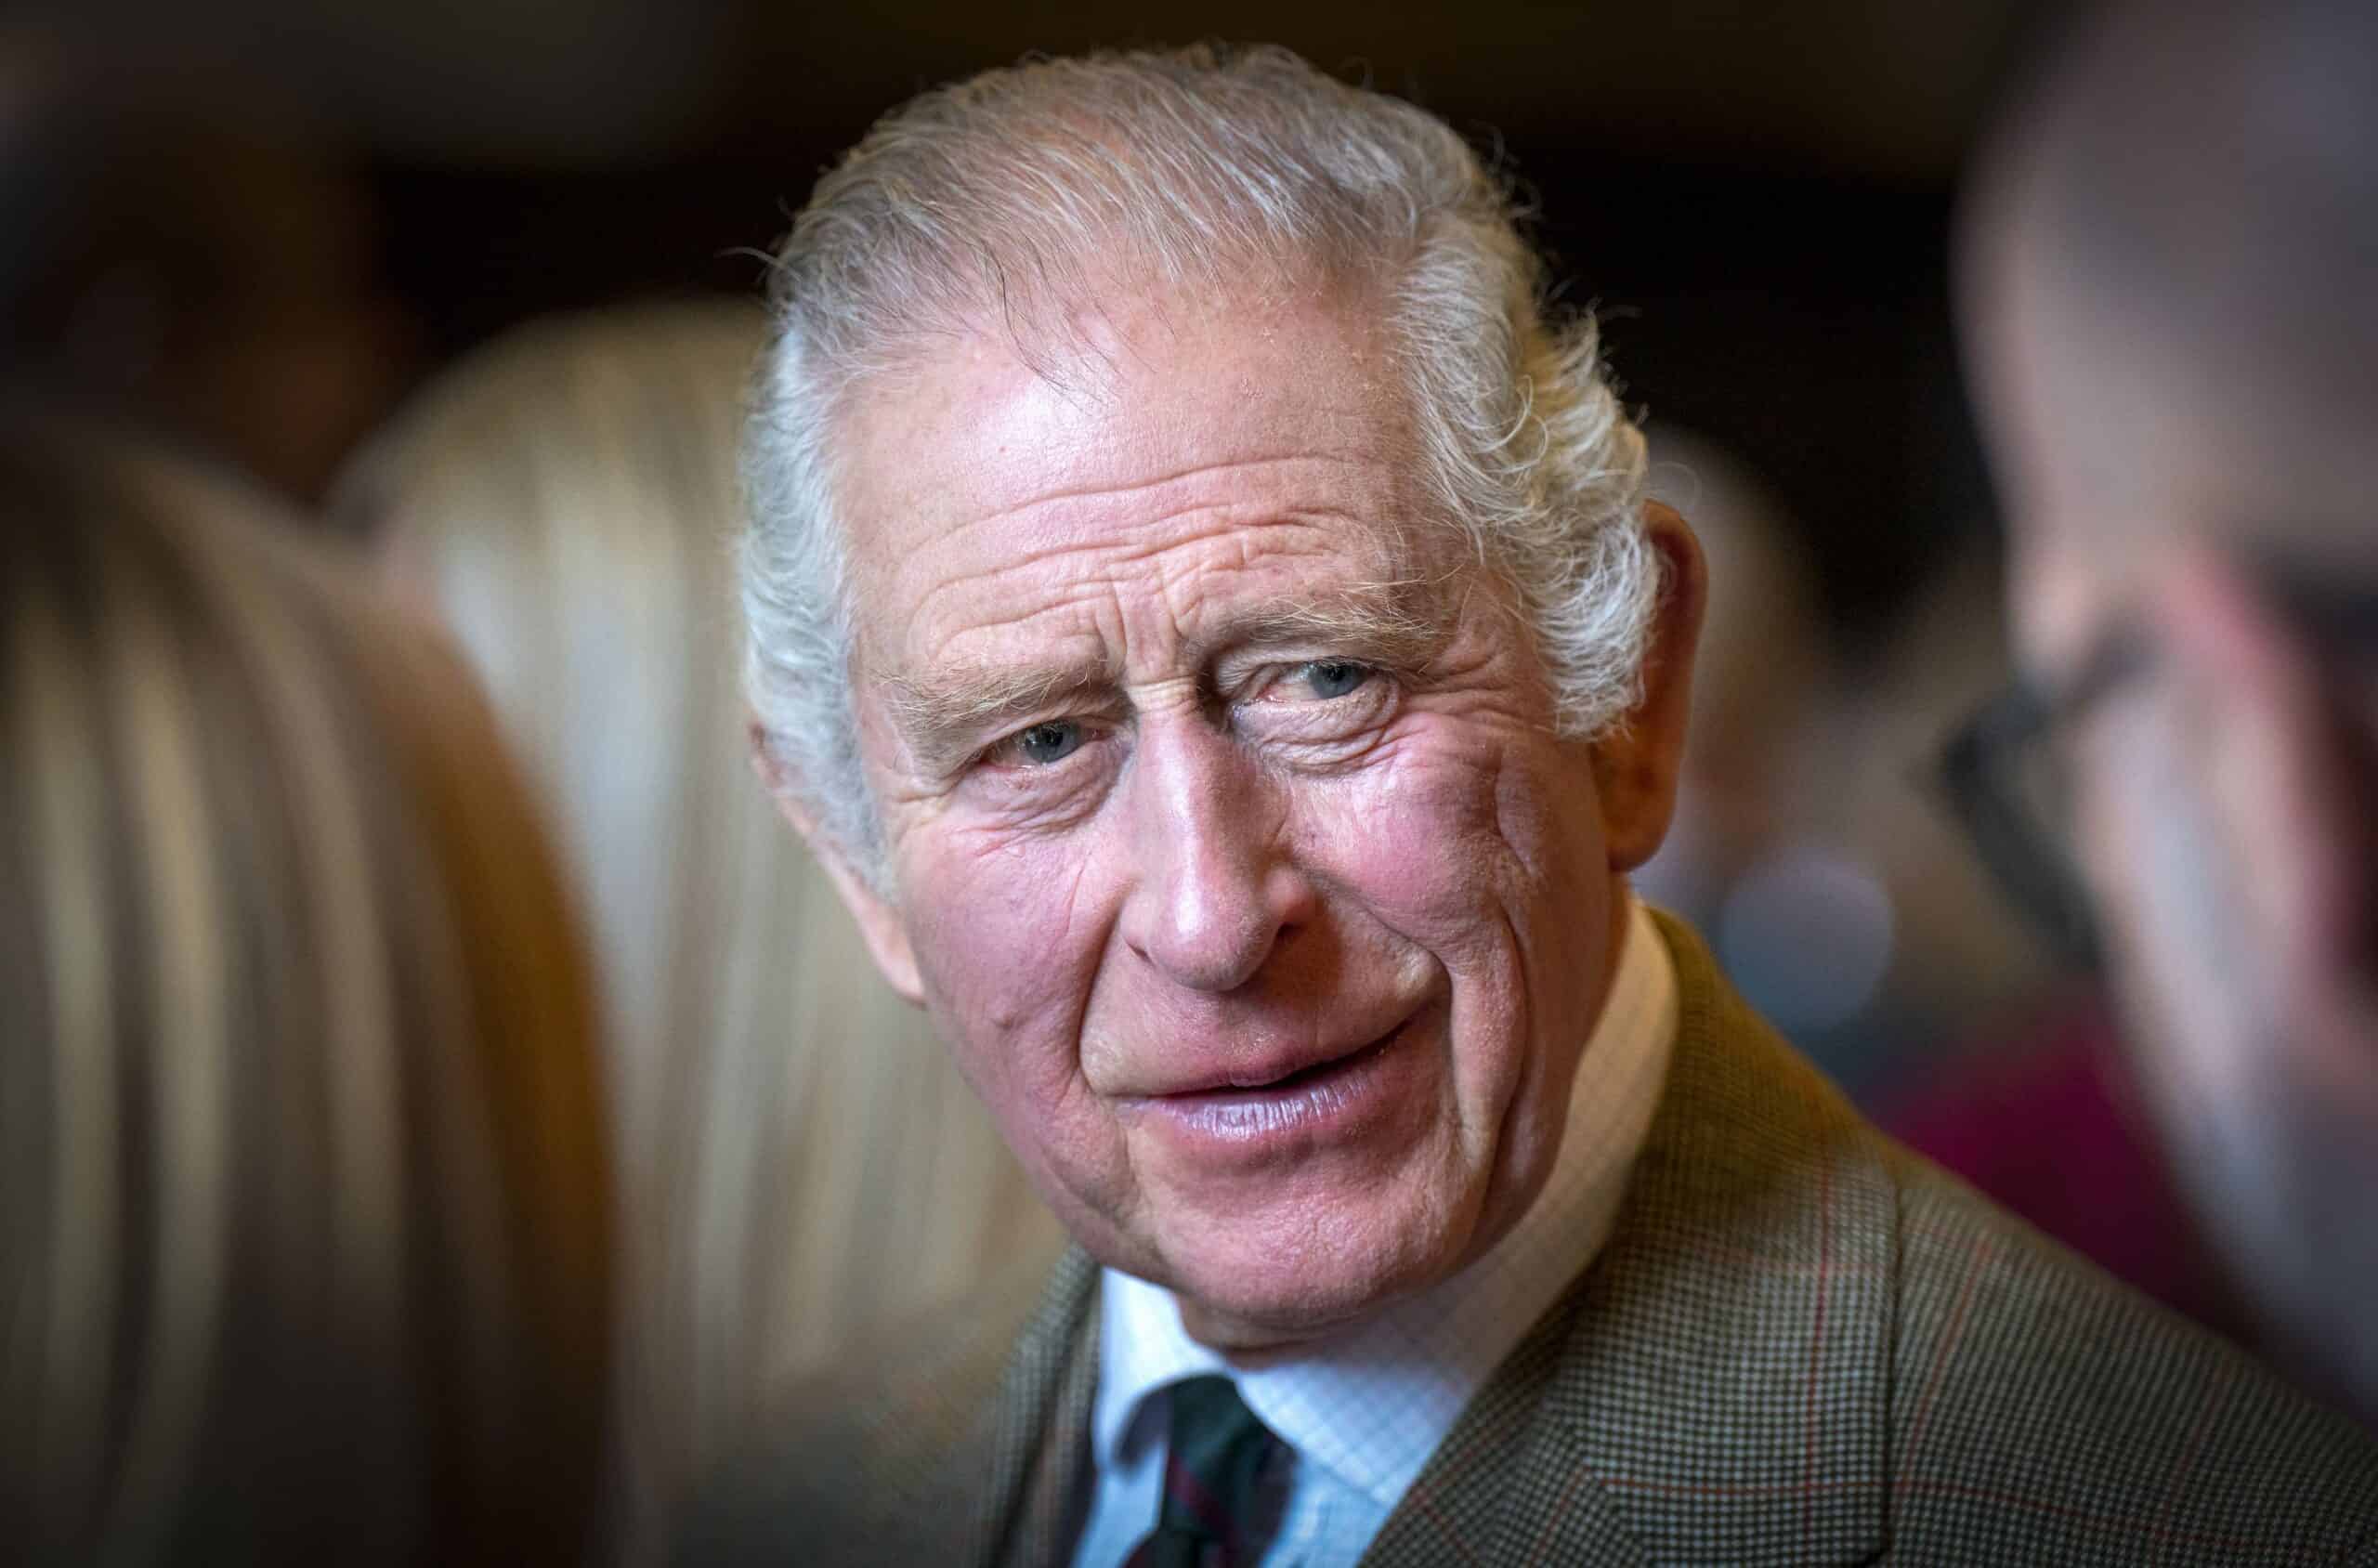 King Charles diagnosed with cancer, Palace announces